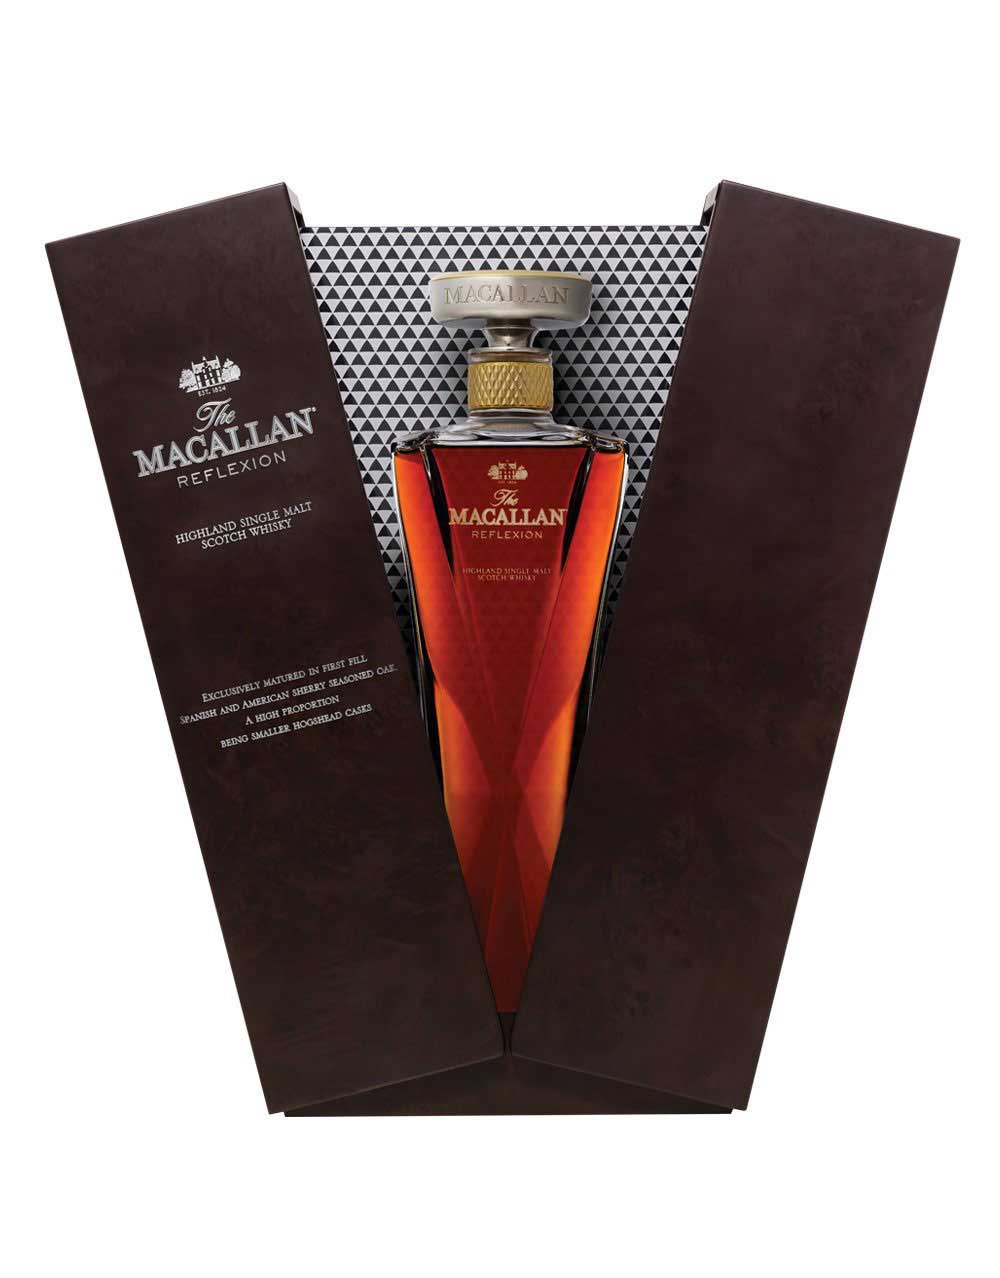 The Macallan Double Cask 12 Year Old: Year of the Rat Gift Set